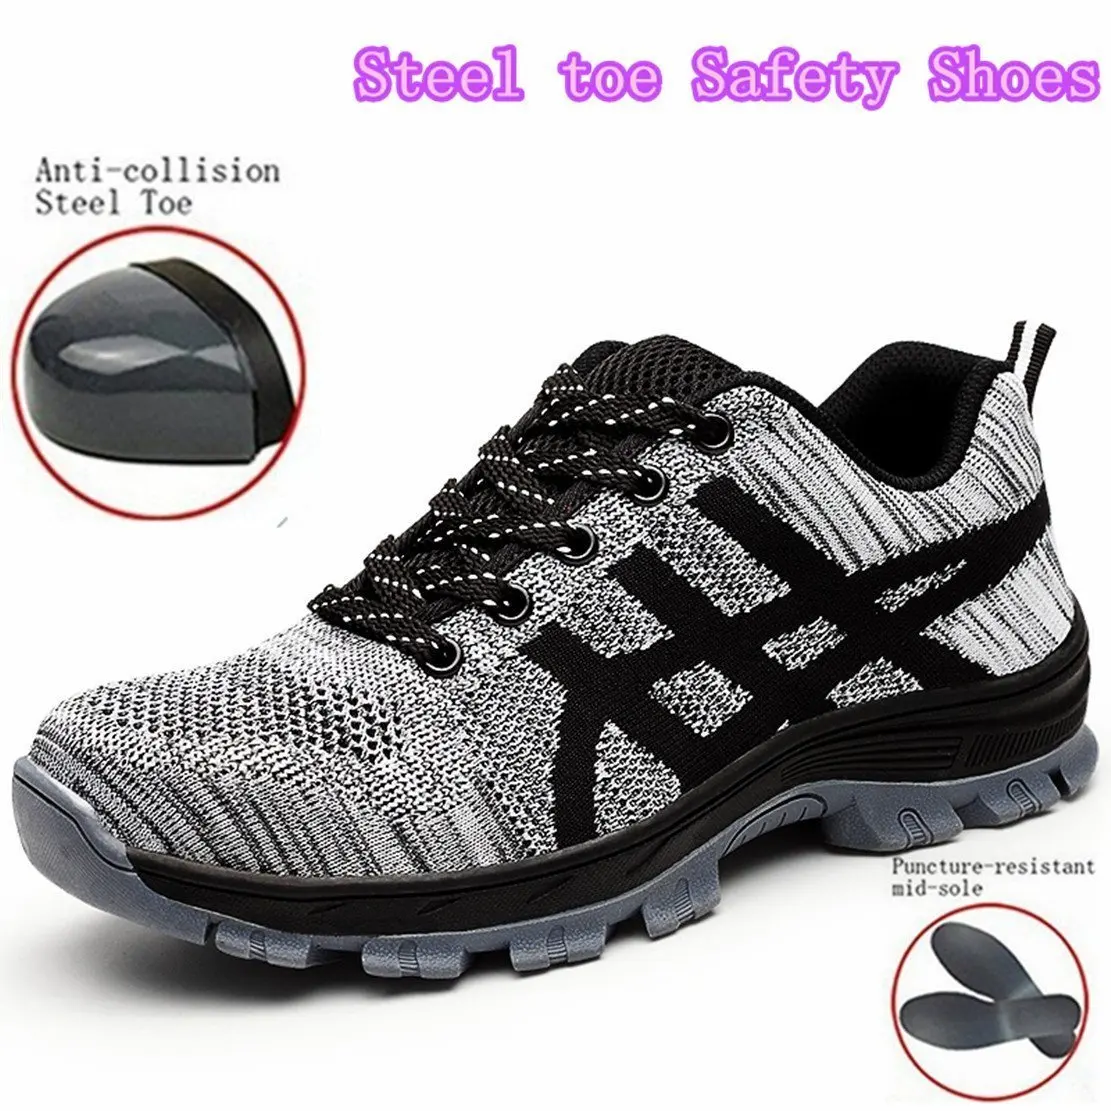 steel toe gym shoes